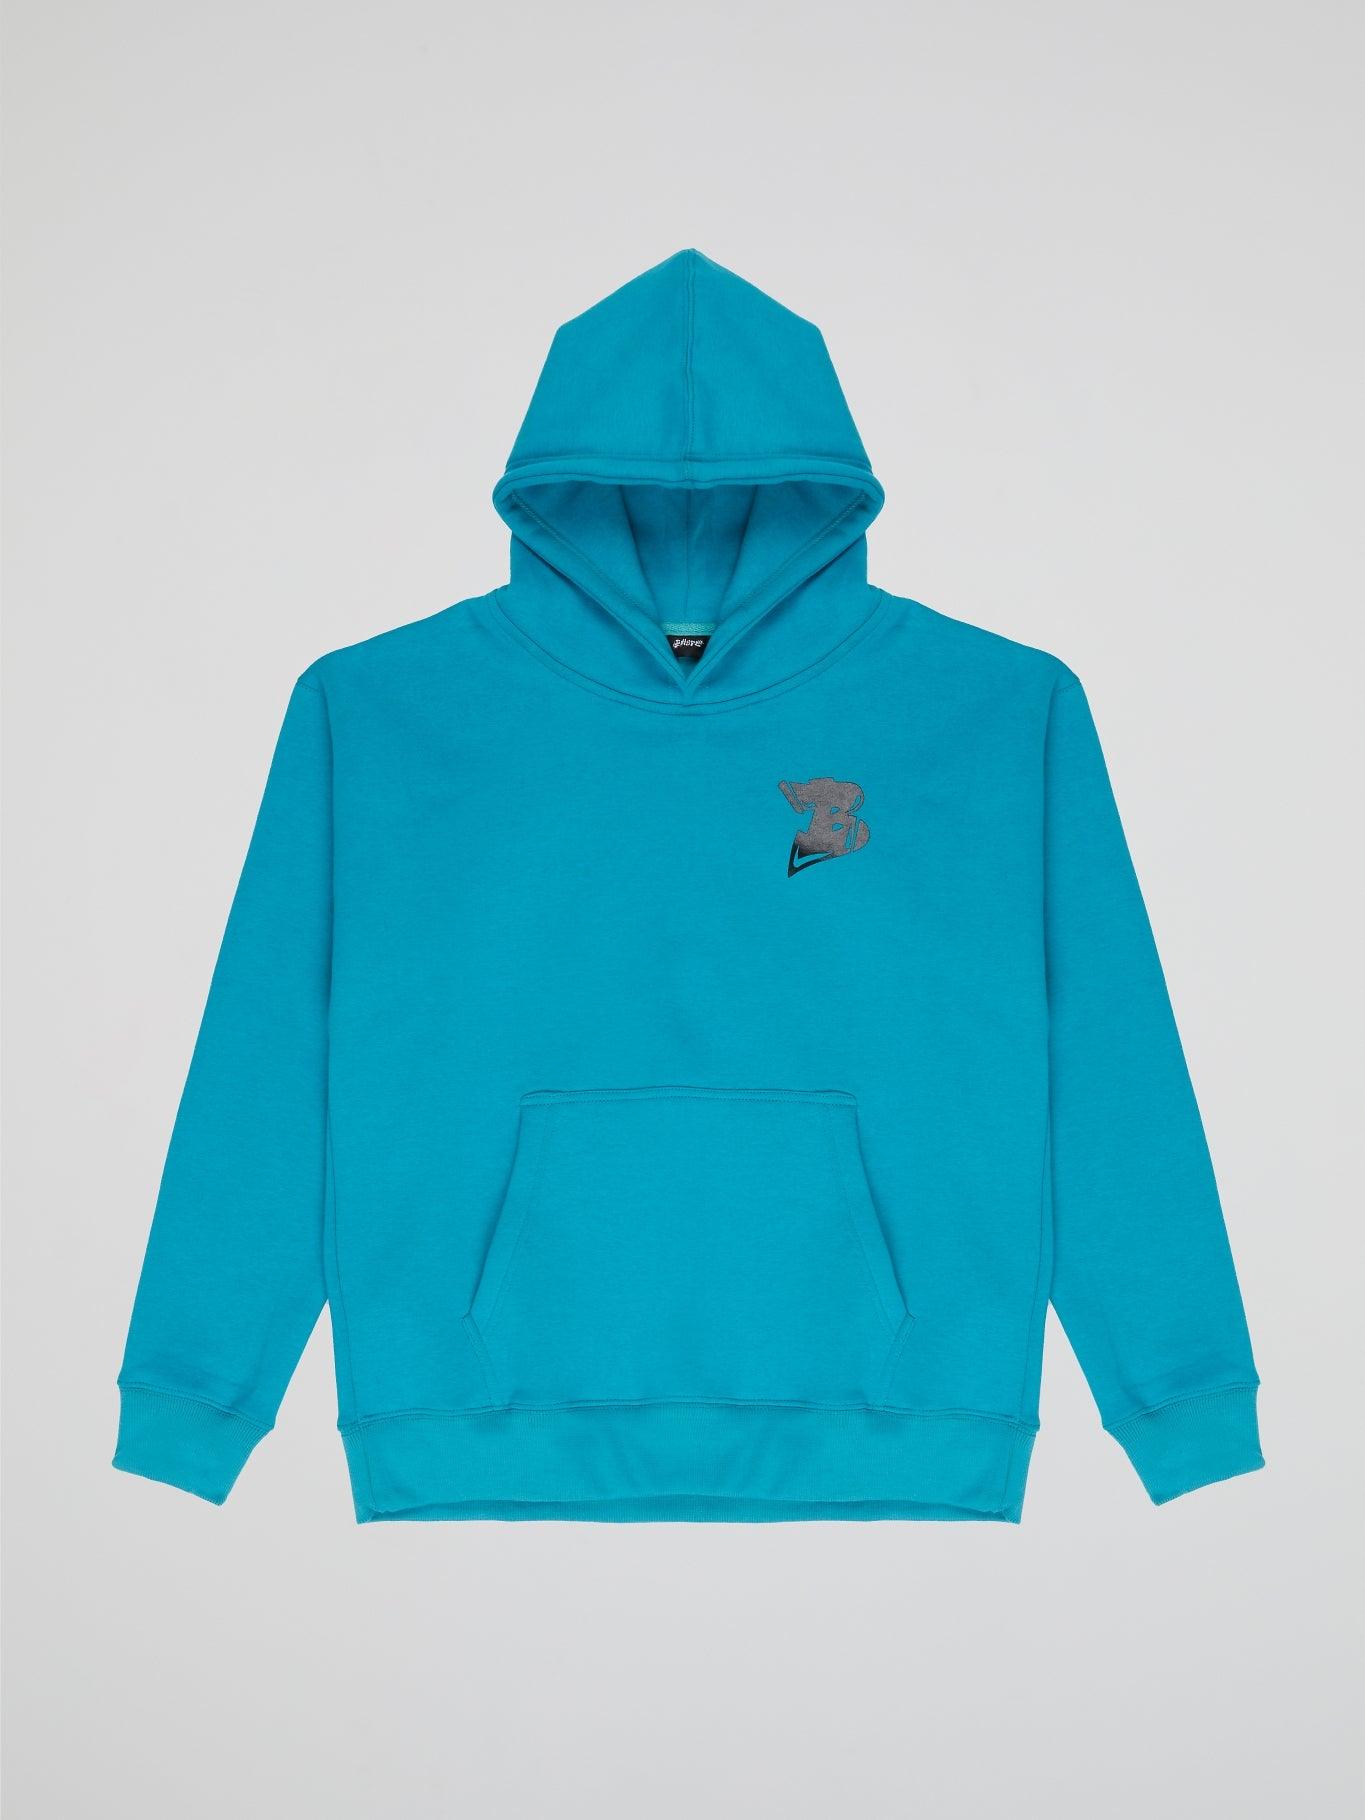 BHYPE LOGO ESSENTIALS TURQUOISE BLUE HOODIE - B-Hype Society